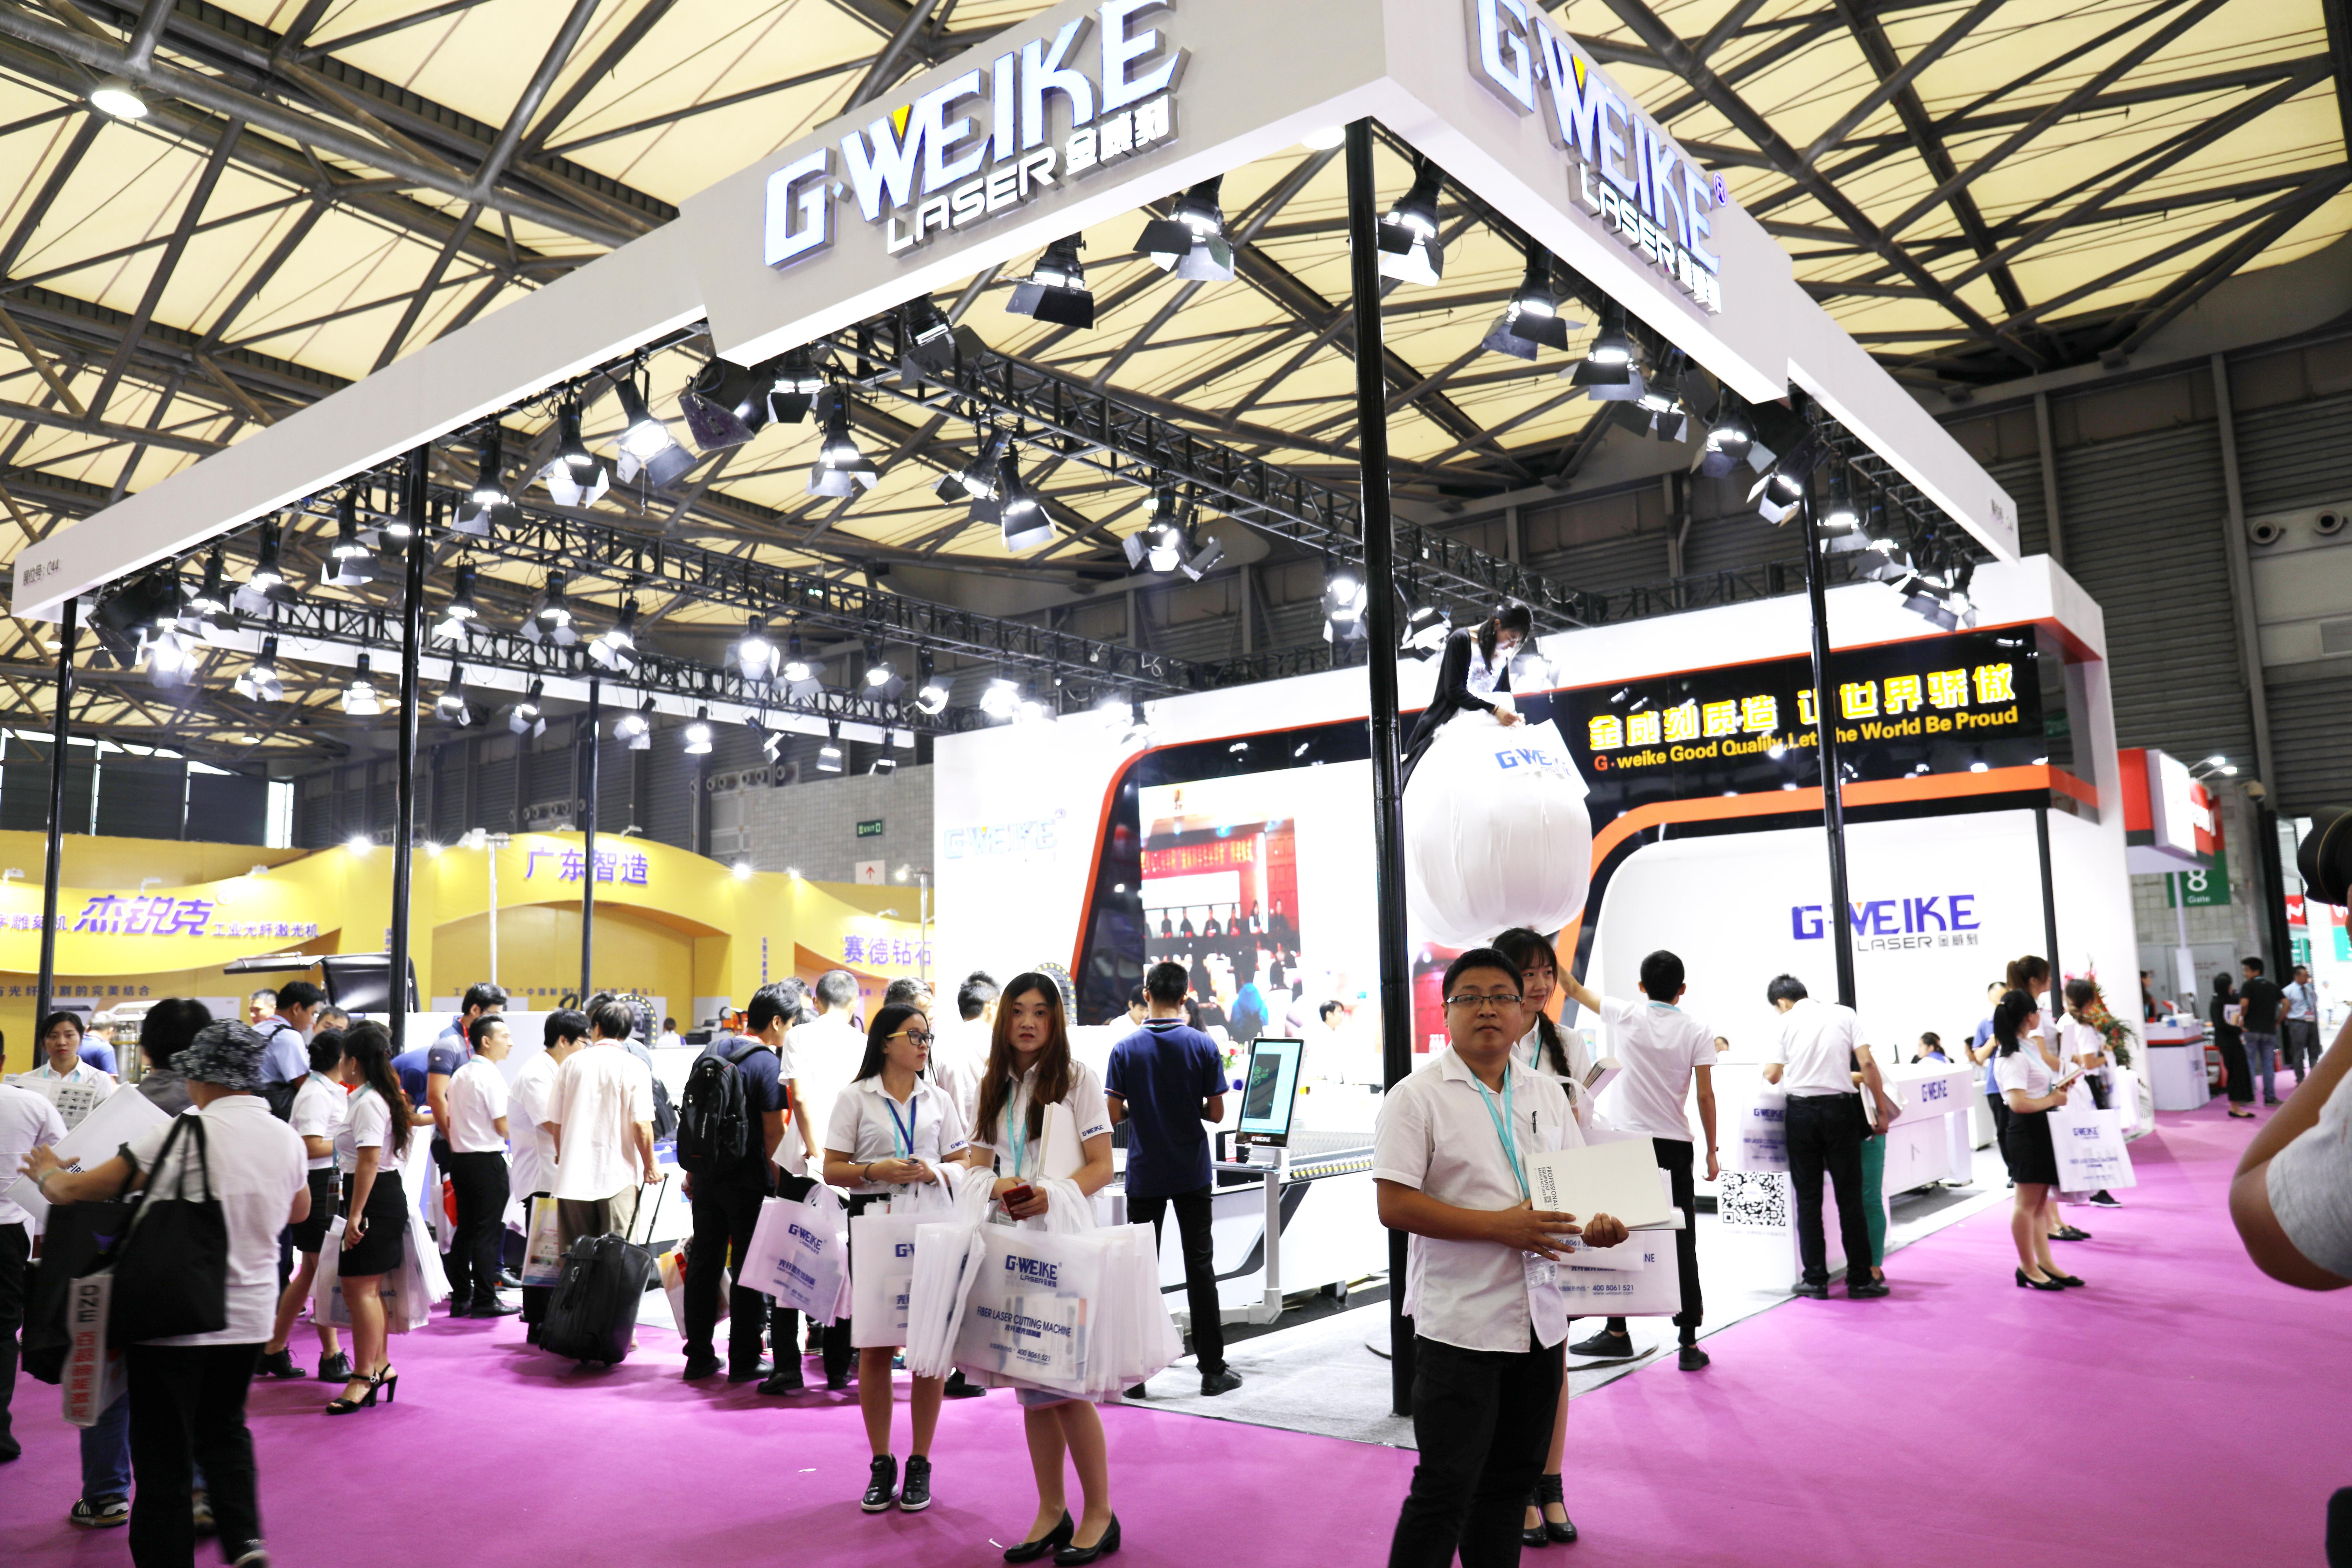 G.WEIKE just wrapped up its show on Shanghai EXPO